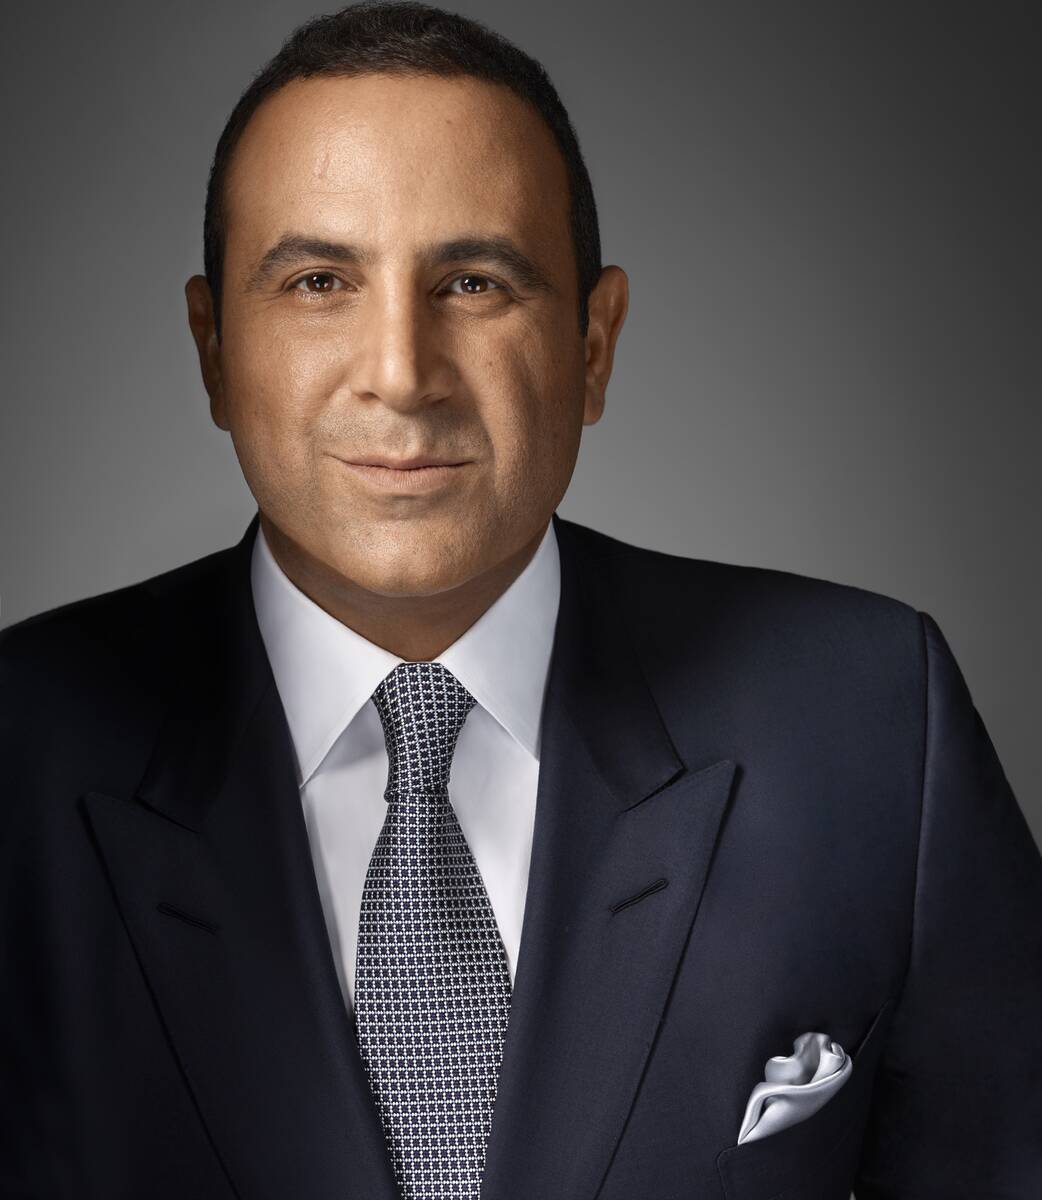 Hospitality company SBE founder and CEO Sam Nazarian is partnering with Resorts World's Zouk Gr ...